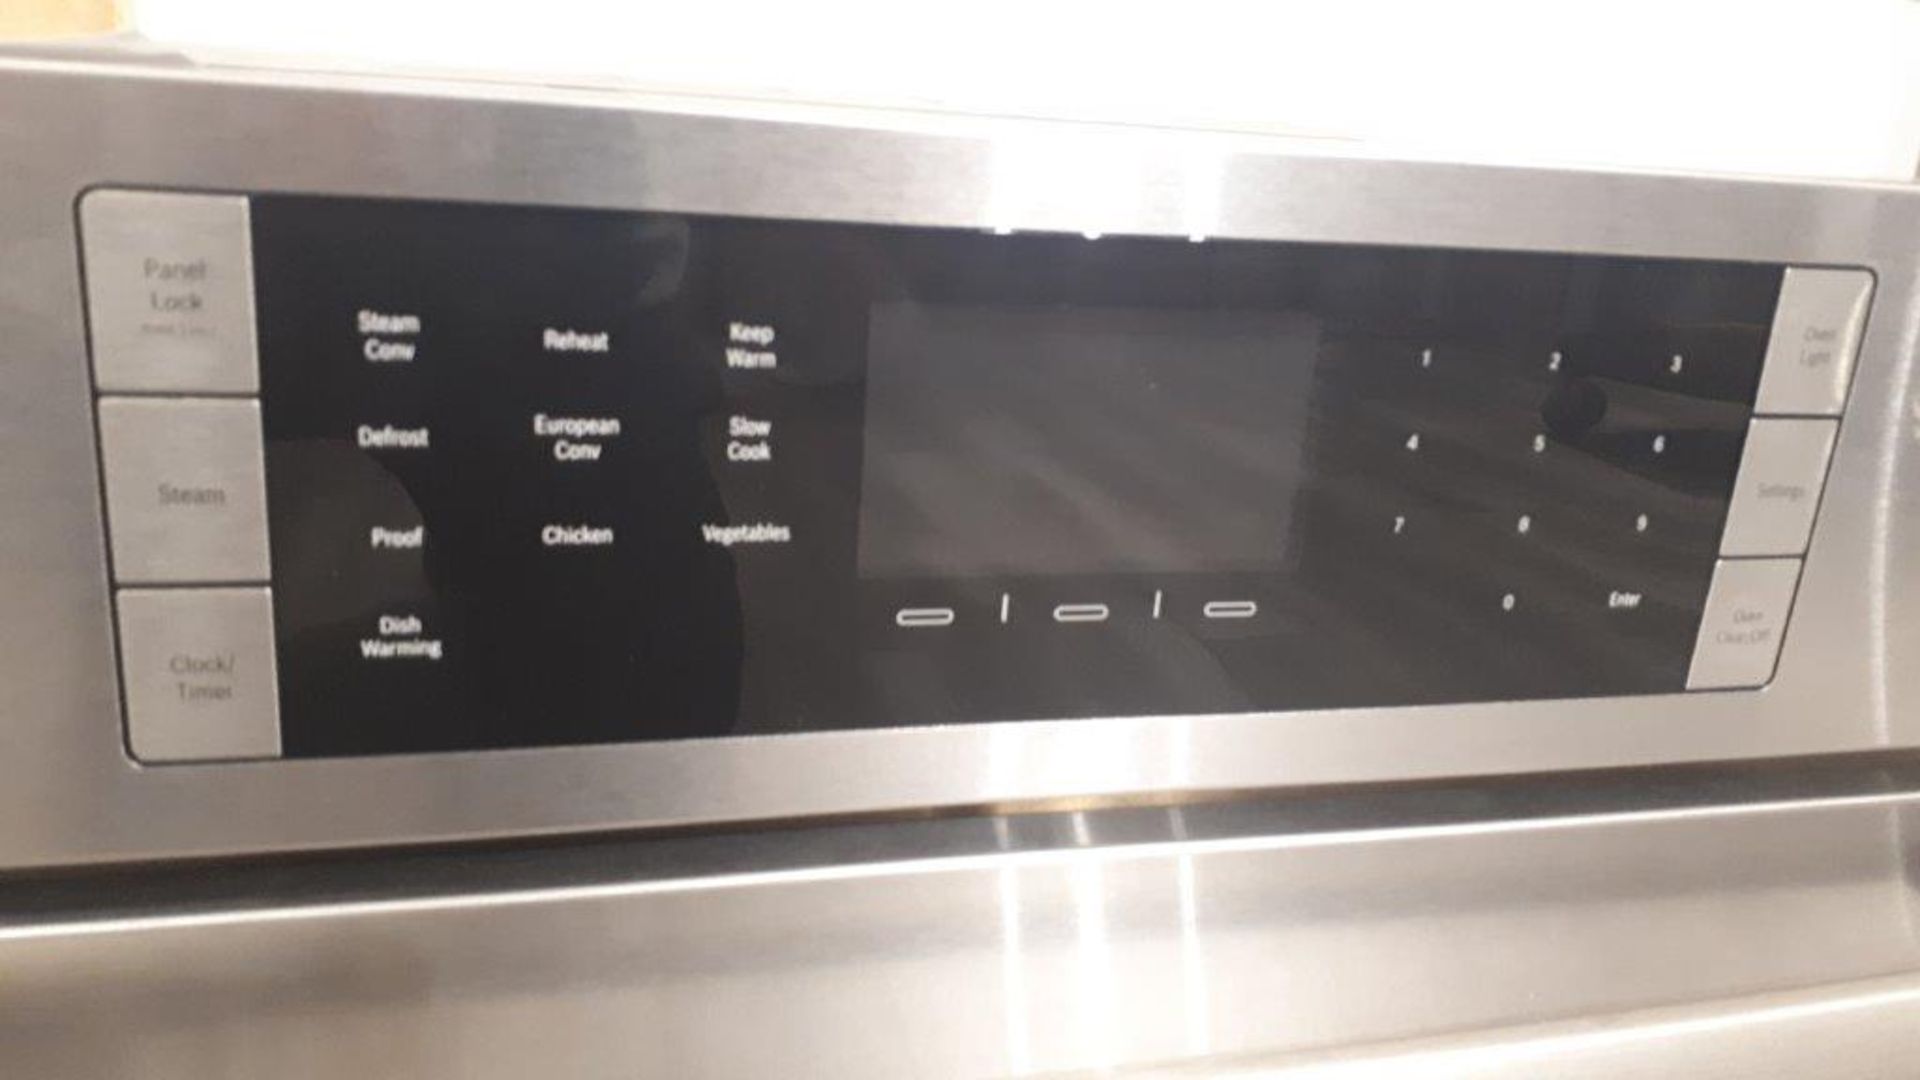 Bosch HSLP451UC 30” stainless steel wall steam convection oven - Image 2 of 4